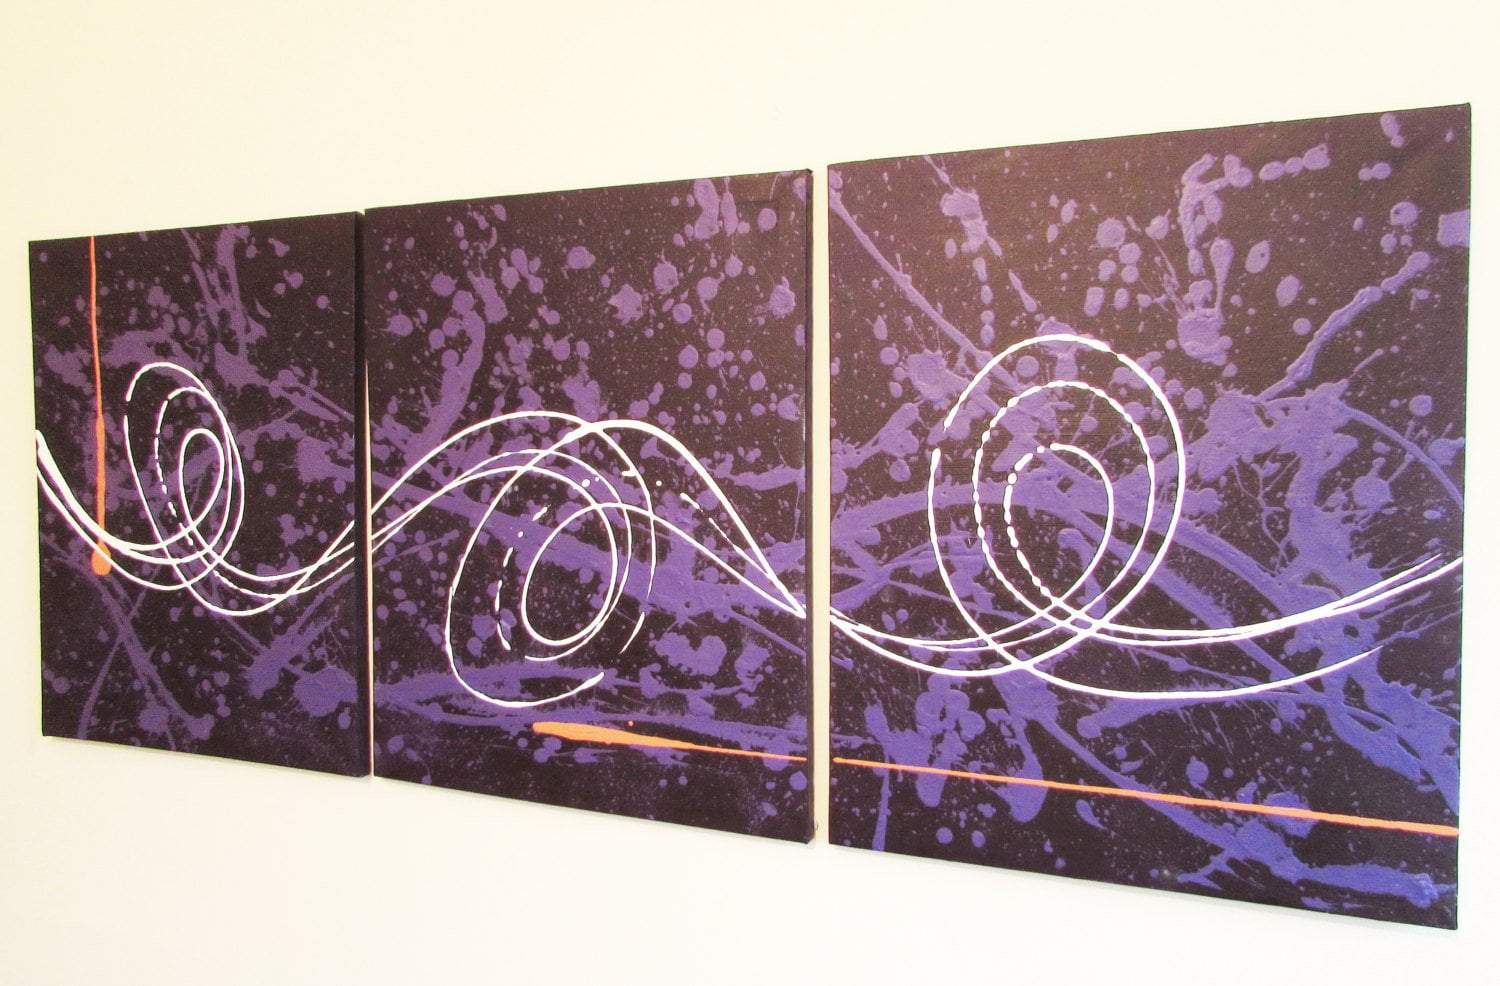 triptych canvas deep purple abstract paintings 3 big sizes